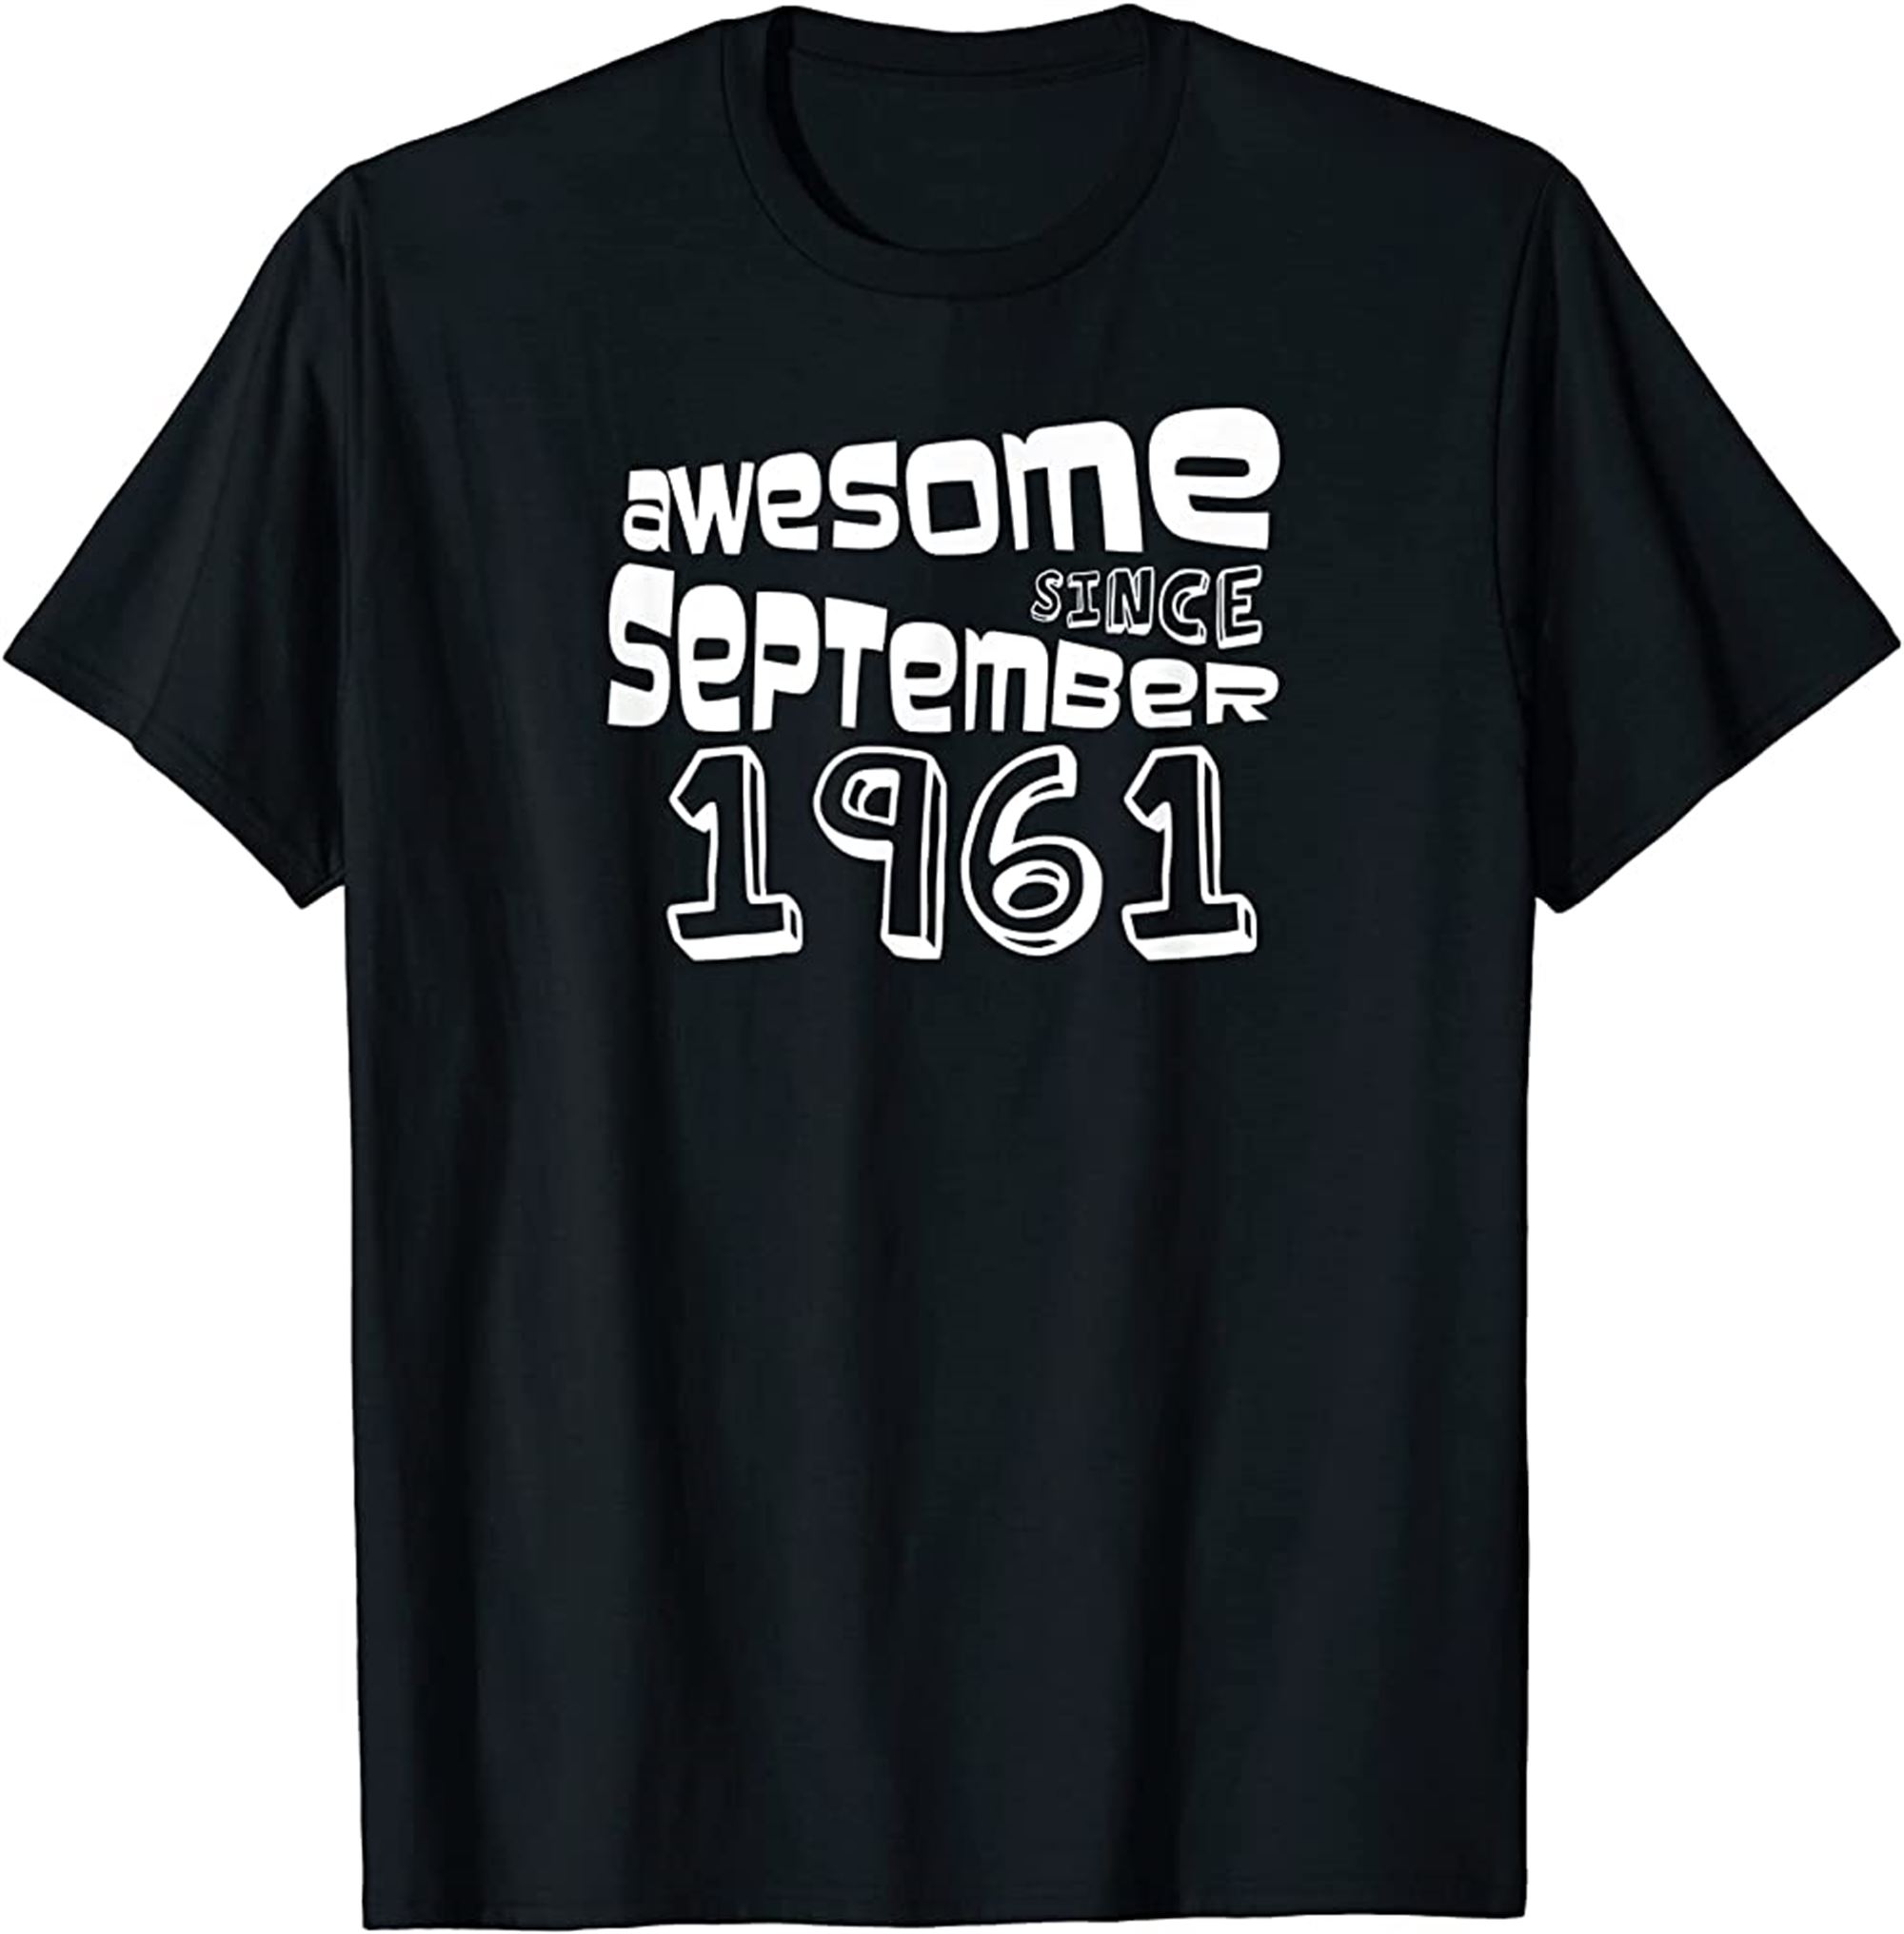 Vintage Awesome Since September 1961 Bday Birthday T-shirt Plus Size Up To 5xl